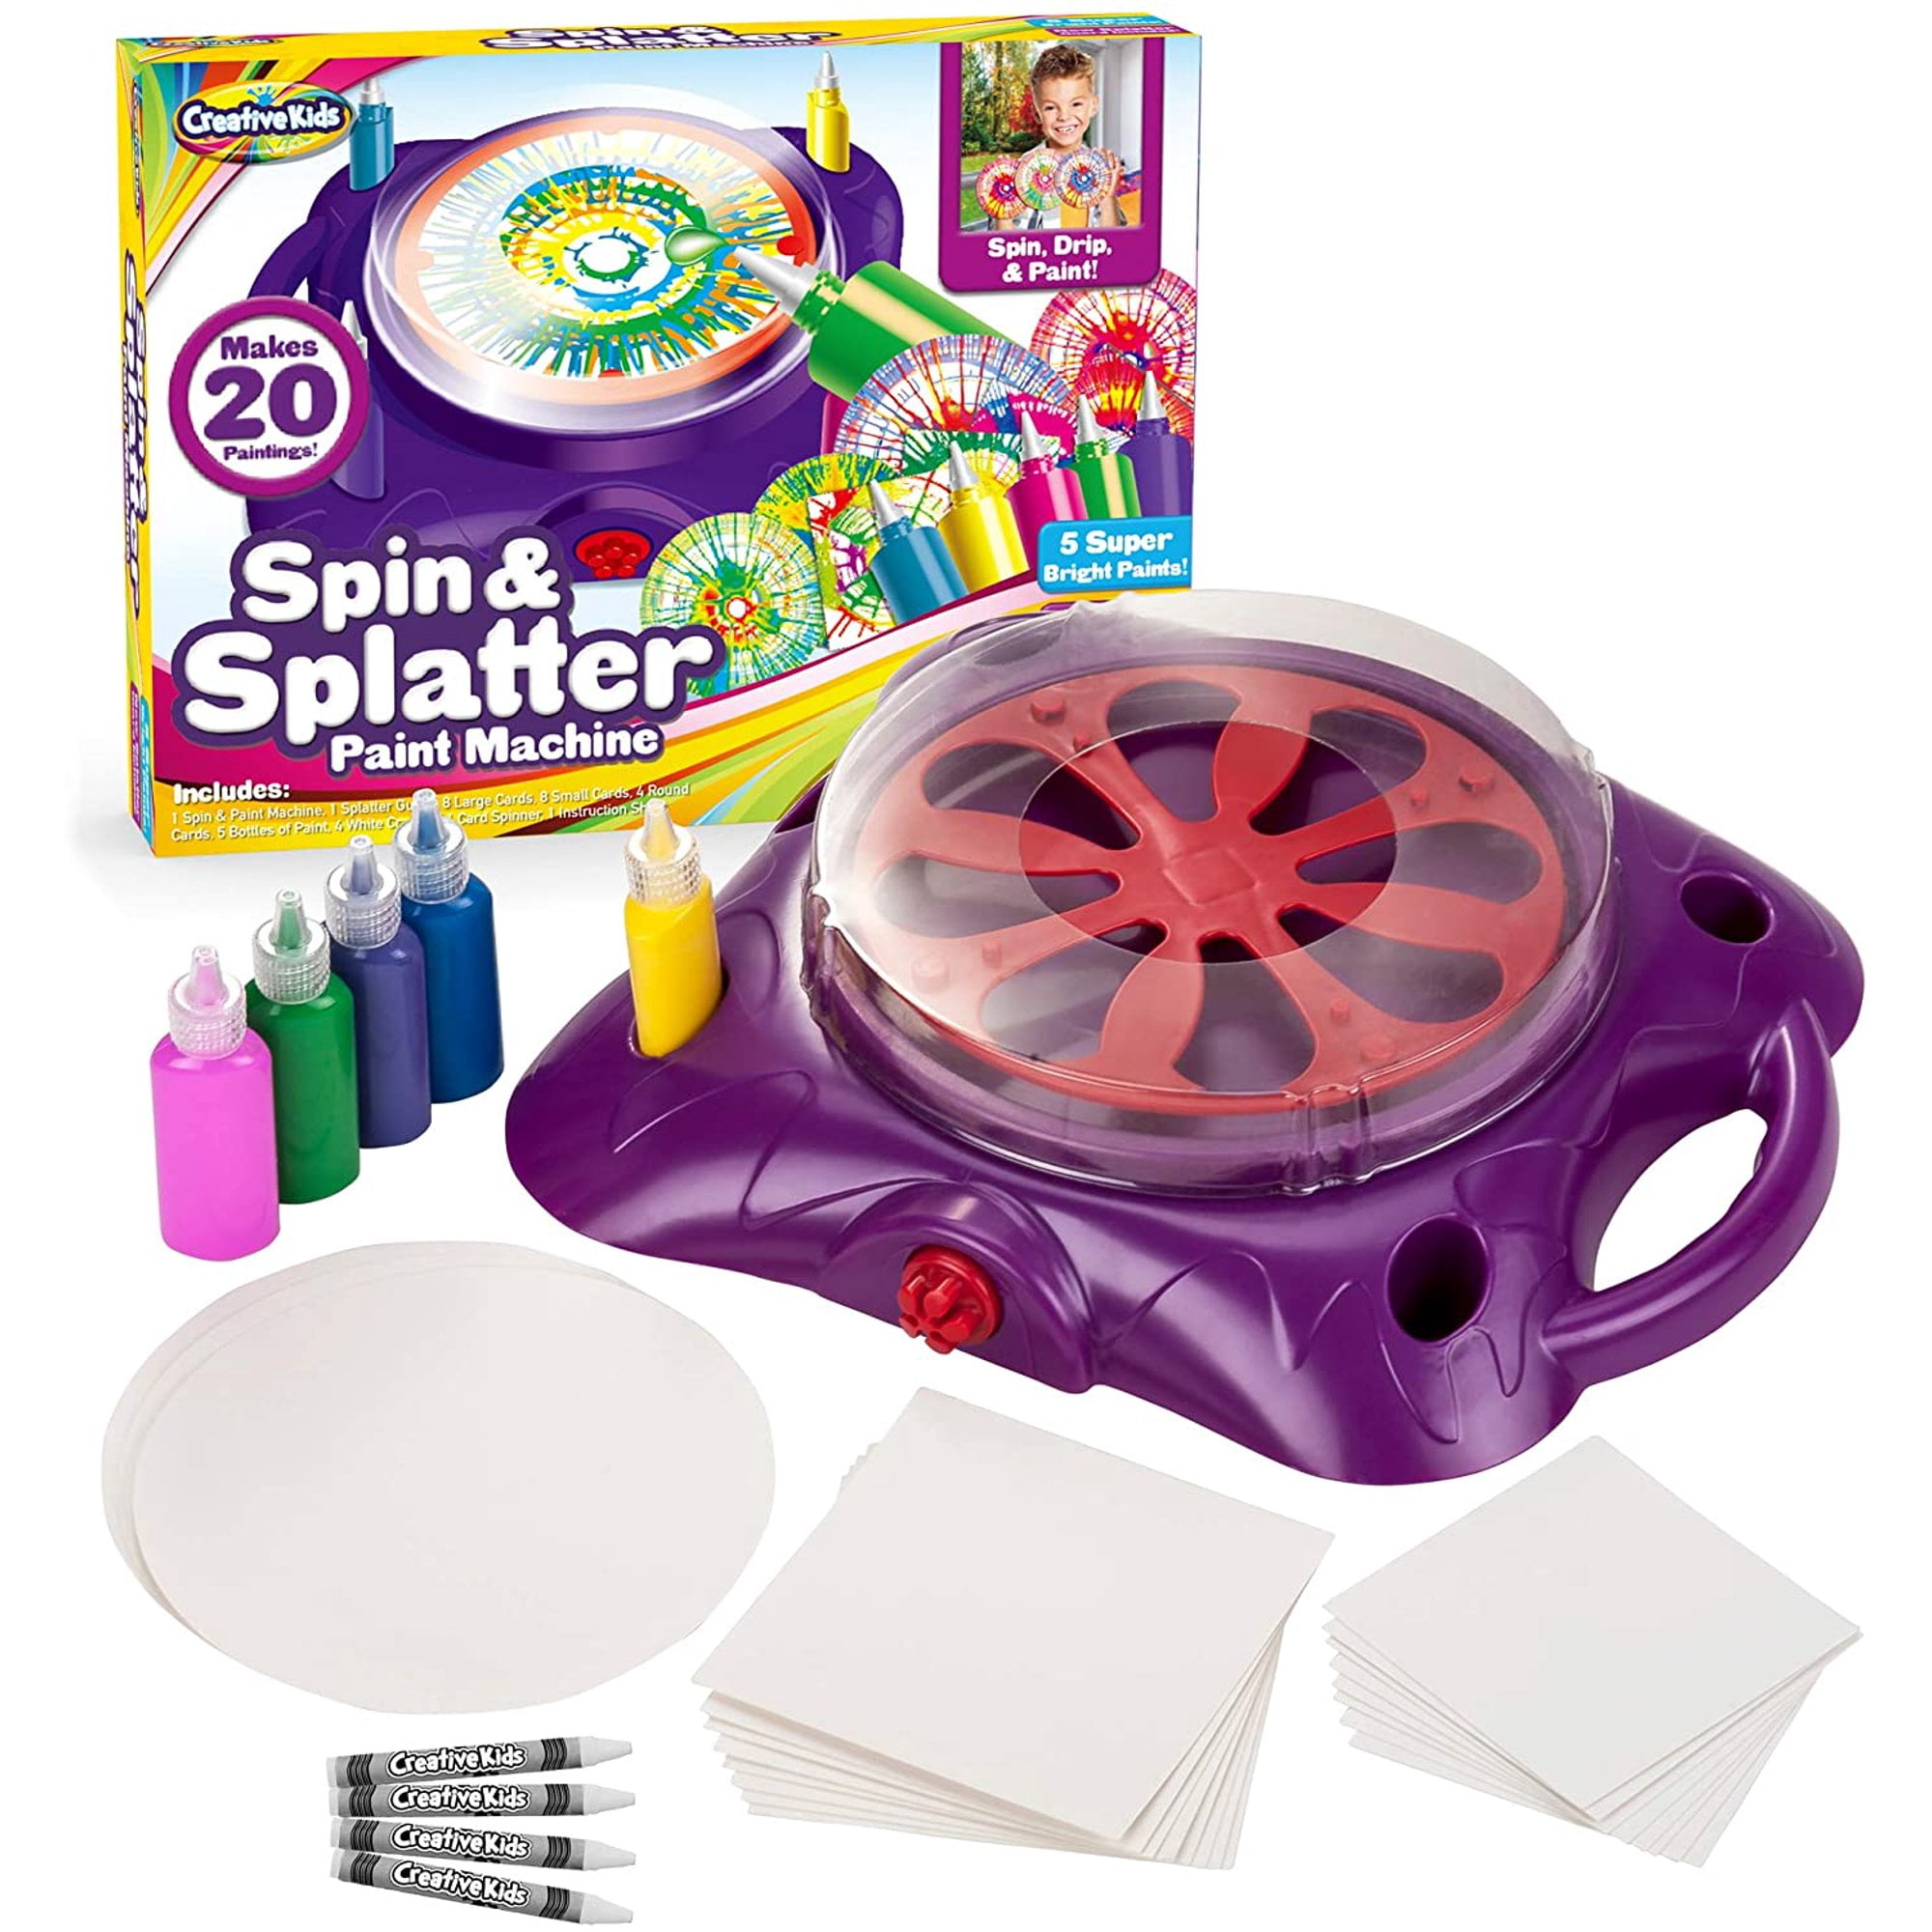 Melissa & Doug Swirl 'n Spin Art Craft Kit With 25 Design Cards 4233 for sale online 